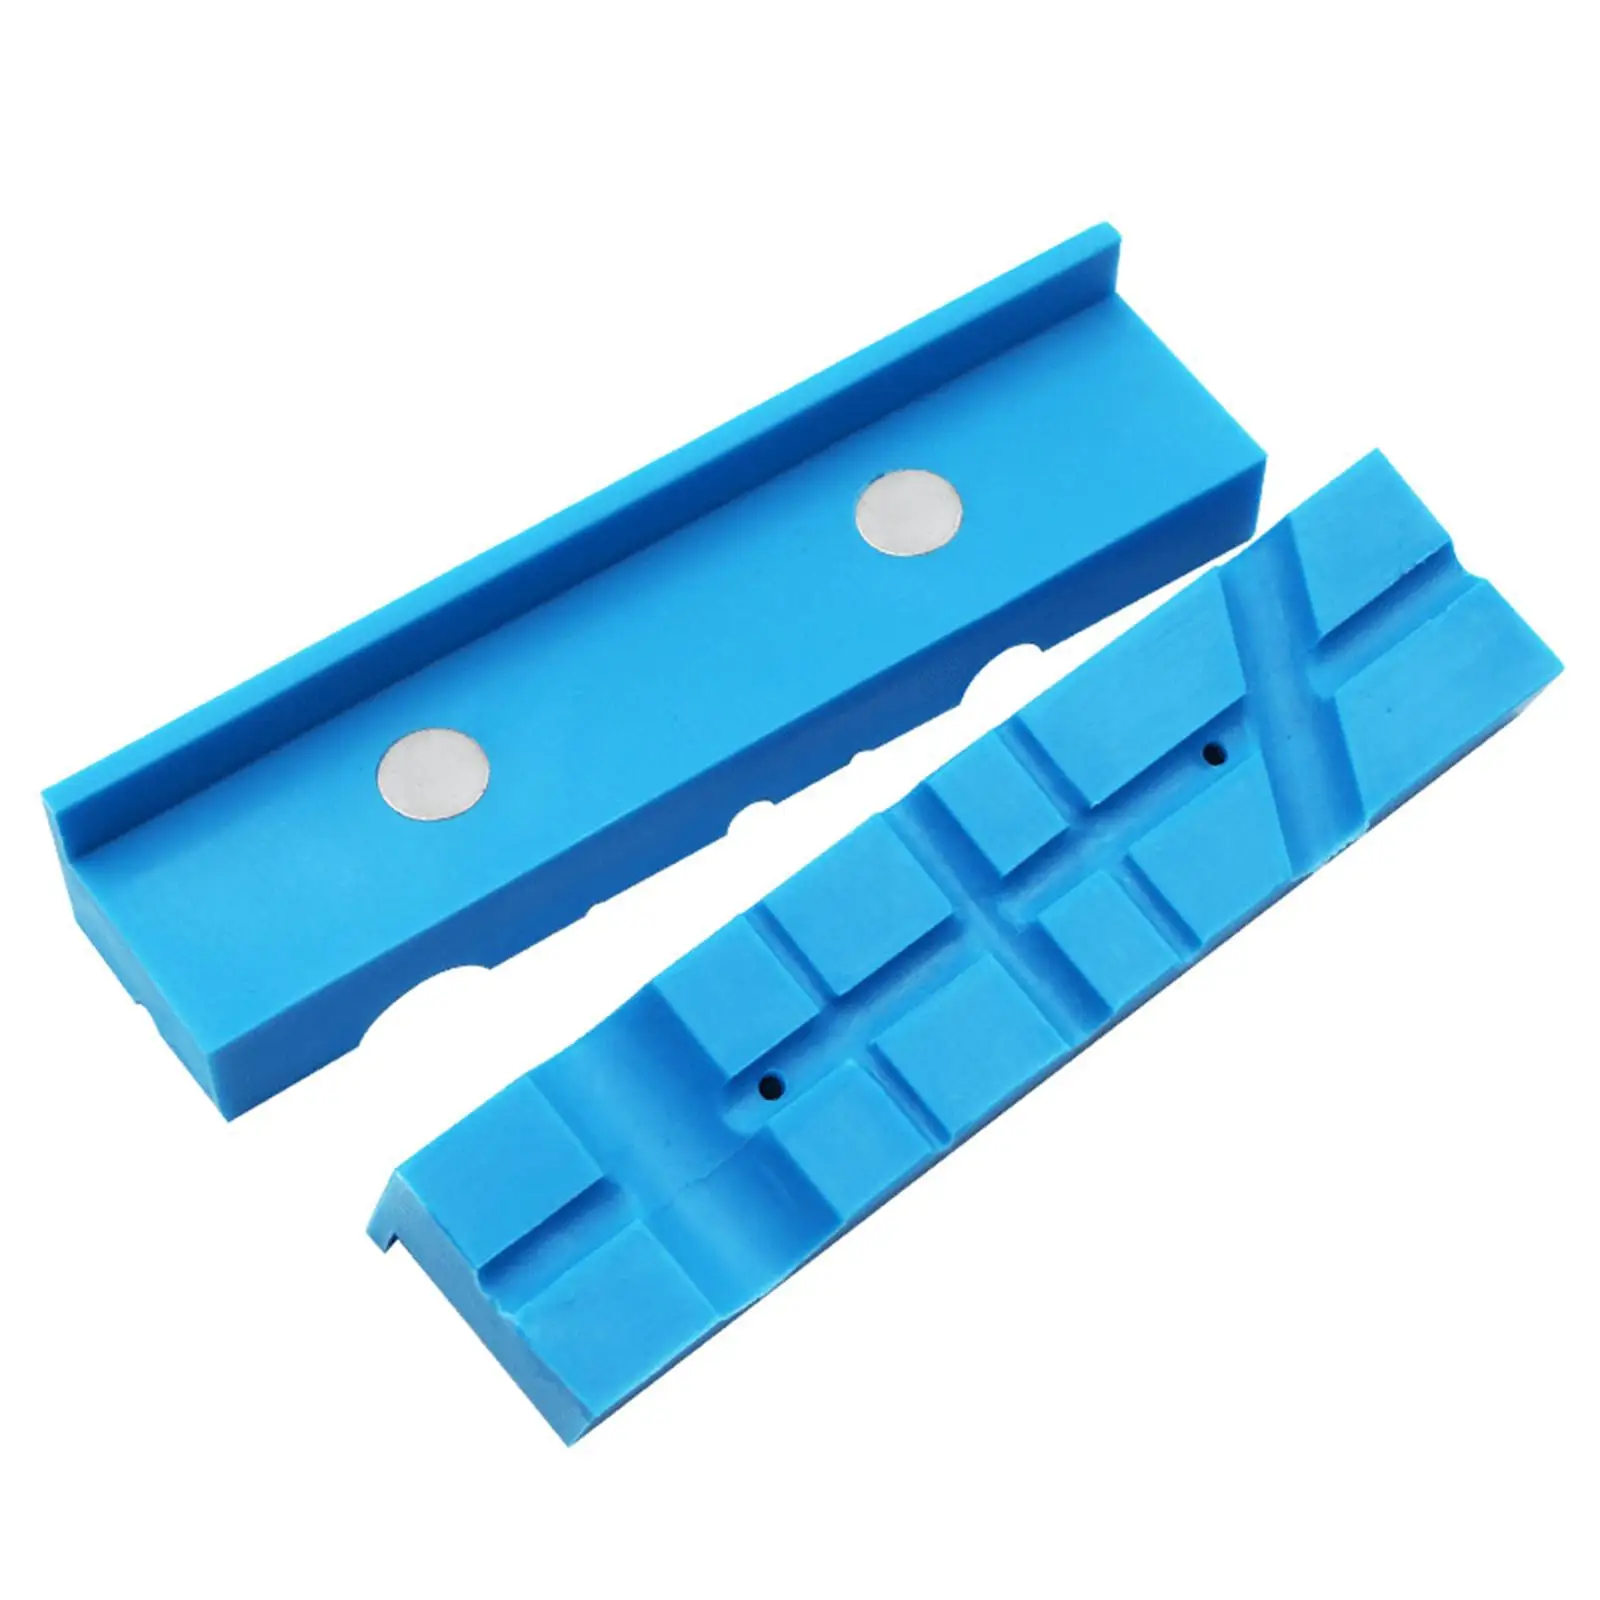 2 Pieces Multi-Groove Bench Vise Jaw Pads Vise Holder Protective Covers Protectors for Woodworking Vices Any Metal Vice